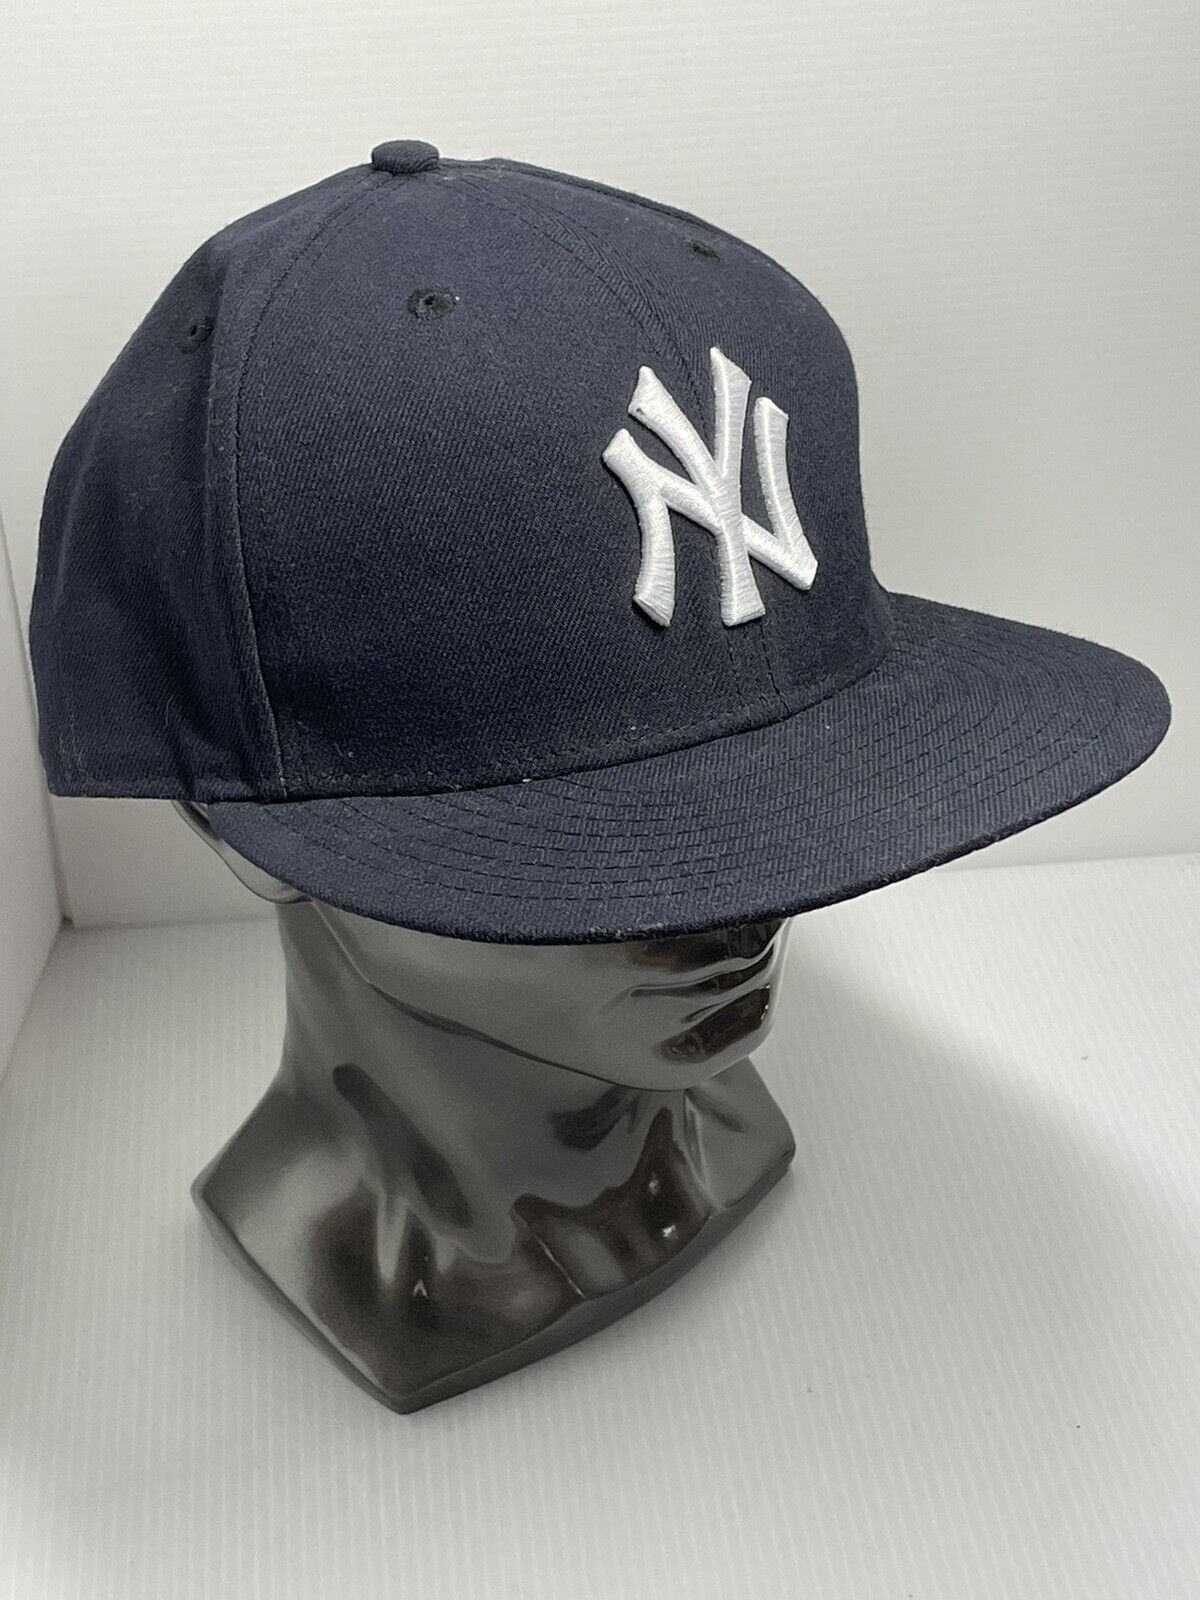 Primary image for New Era Mens New York Yankees MLB Authentic Collection 59FIFTY Cap Size 7 1/2